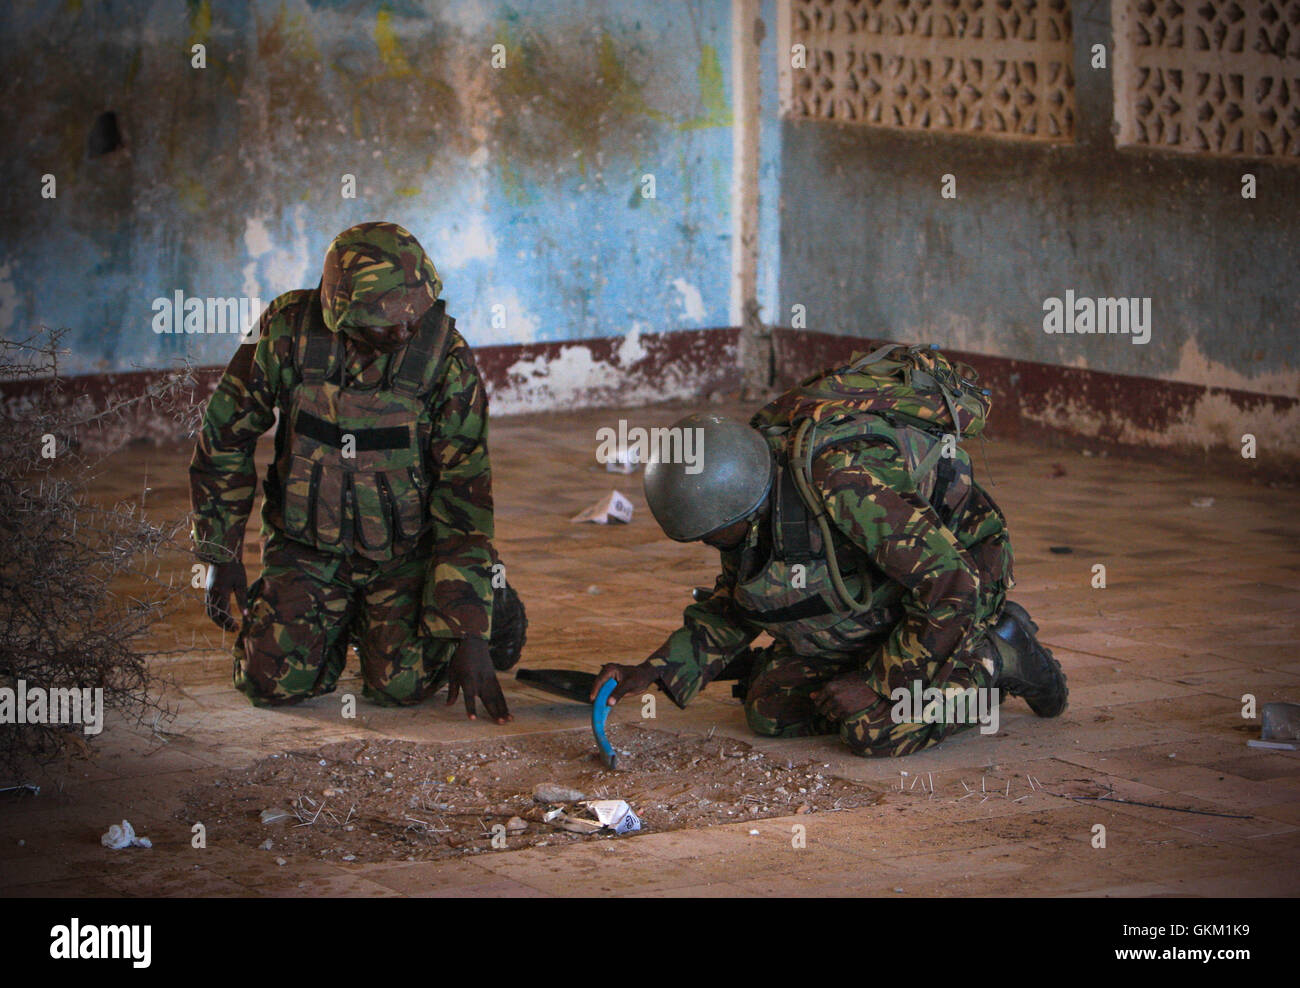 SOMALIA, Kismayo: In a handout photograph released by the African Union-United Nations Information Support Team 03 October, two engineers serving with the Kenyan Contingent of the African Union Mission in Somalia (AMISOM) search a former police station in the southern Somali port city of Kismayo for improvised explosive devices (IEDs). The Al-Qaeda-affiliated extremist group Al Shabaab withdrew from the city on 02 October after AMISOM troops, Somali National Army (SNA) forces and the pro-government Ras Kimboni Brigade militia entered and captured Kismayo without a fight. During their security  Stock Photo